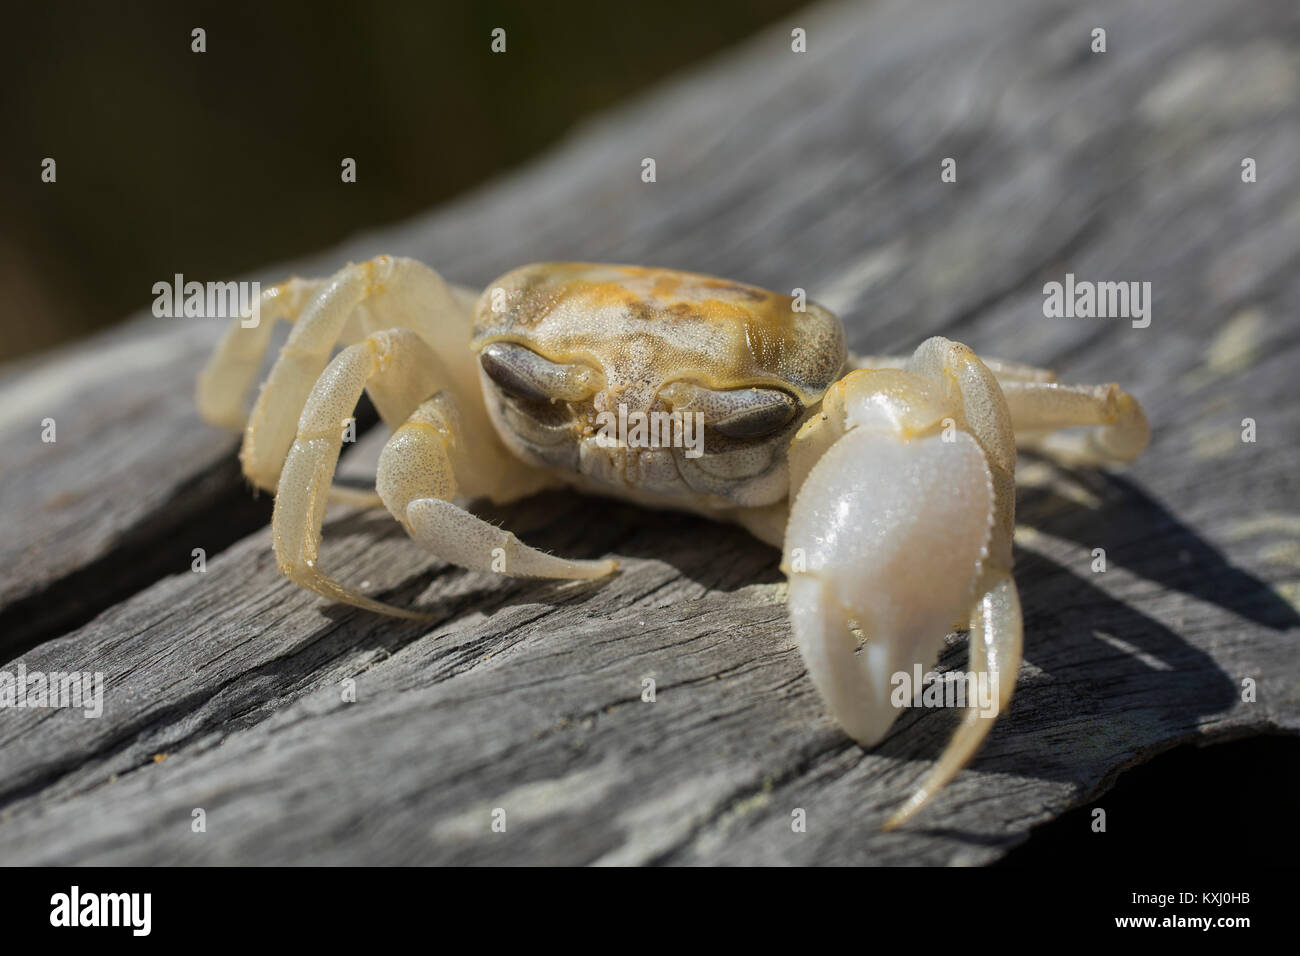 Close-up of crab on wood, Bermagui, New South Wales, Australia Stock Photo